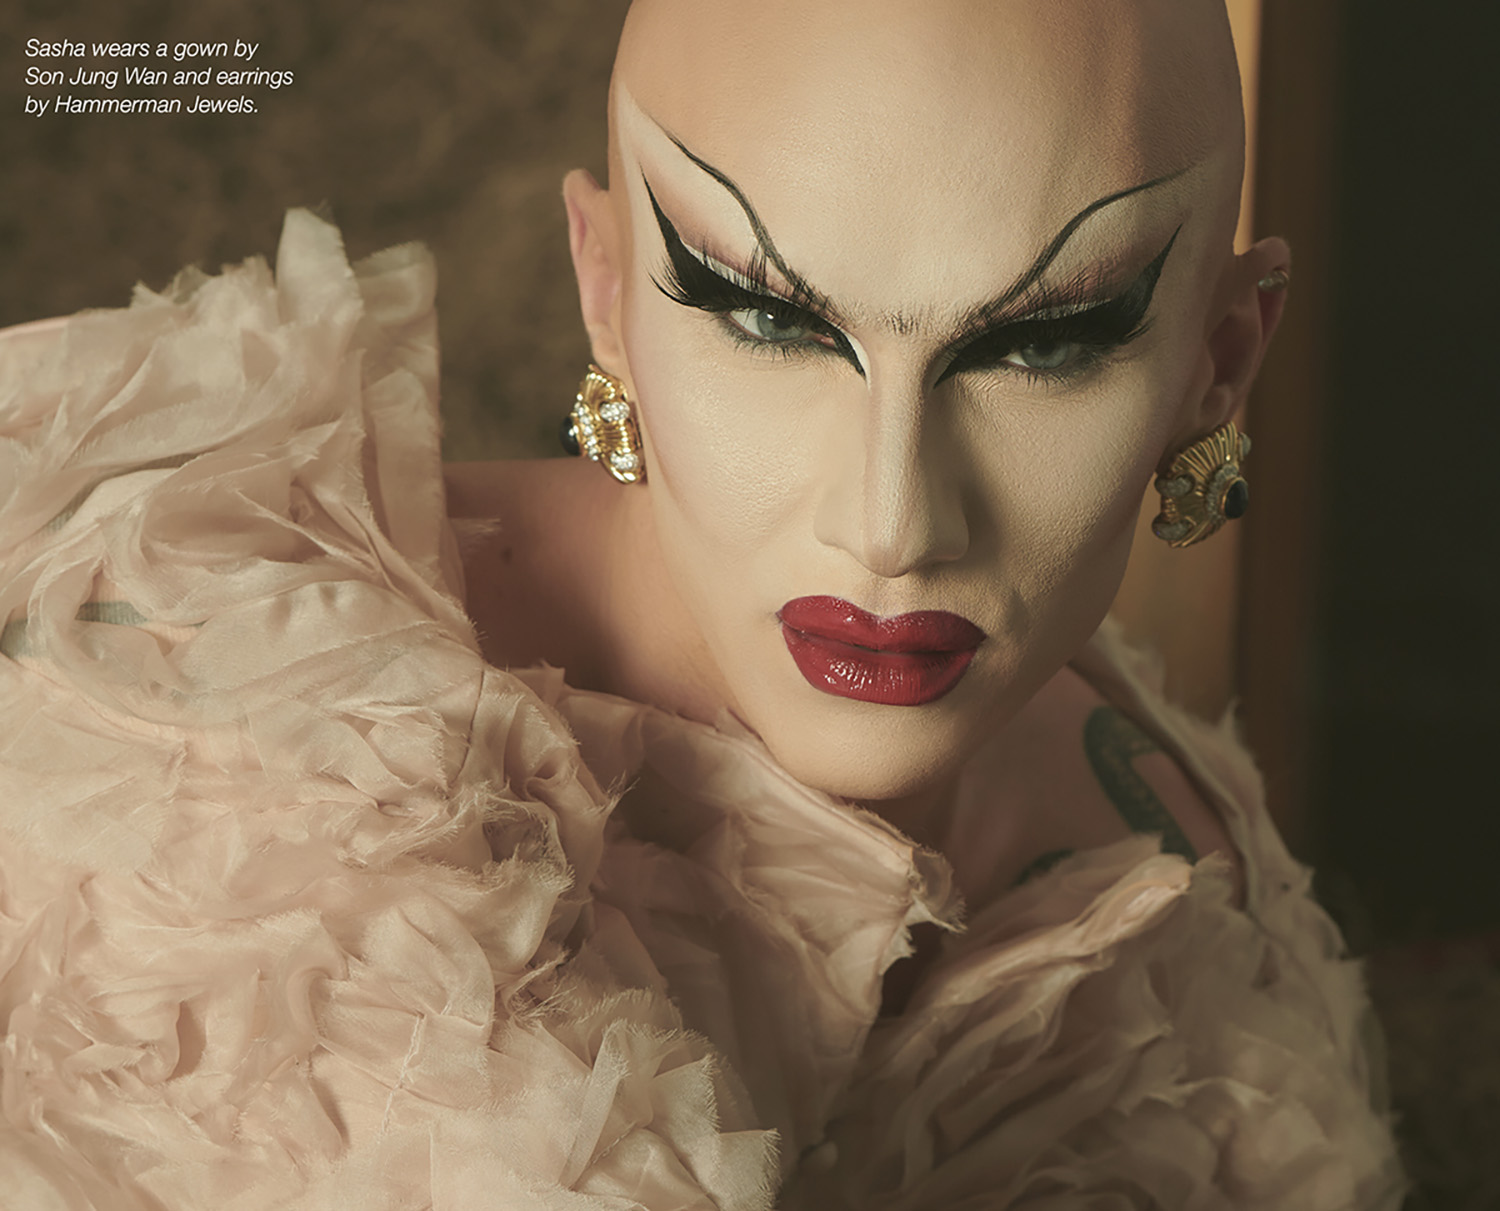 Jewish drag queen Sasha Velour is on the cover of The New Yorker this week  - New York Jewish Week